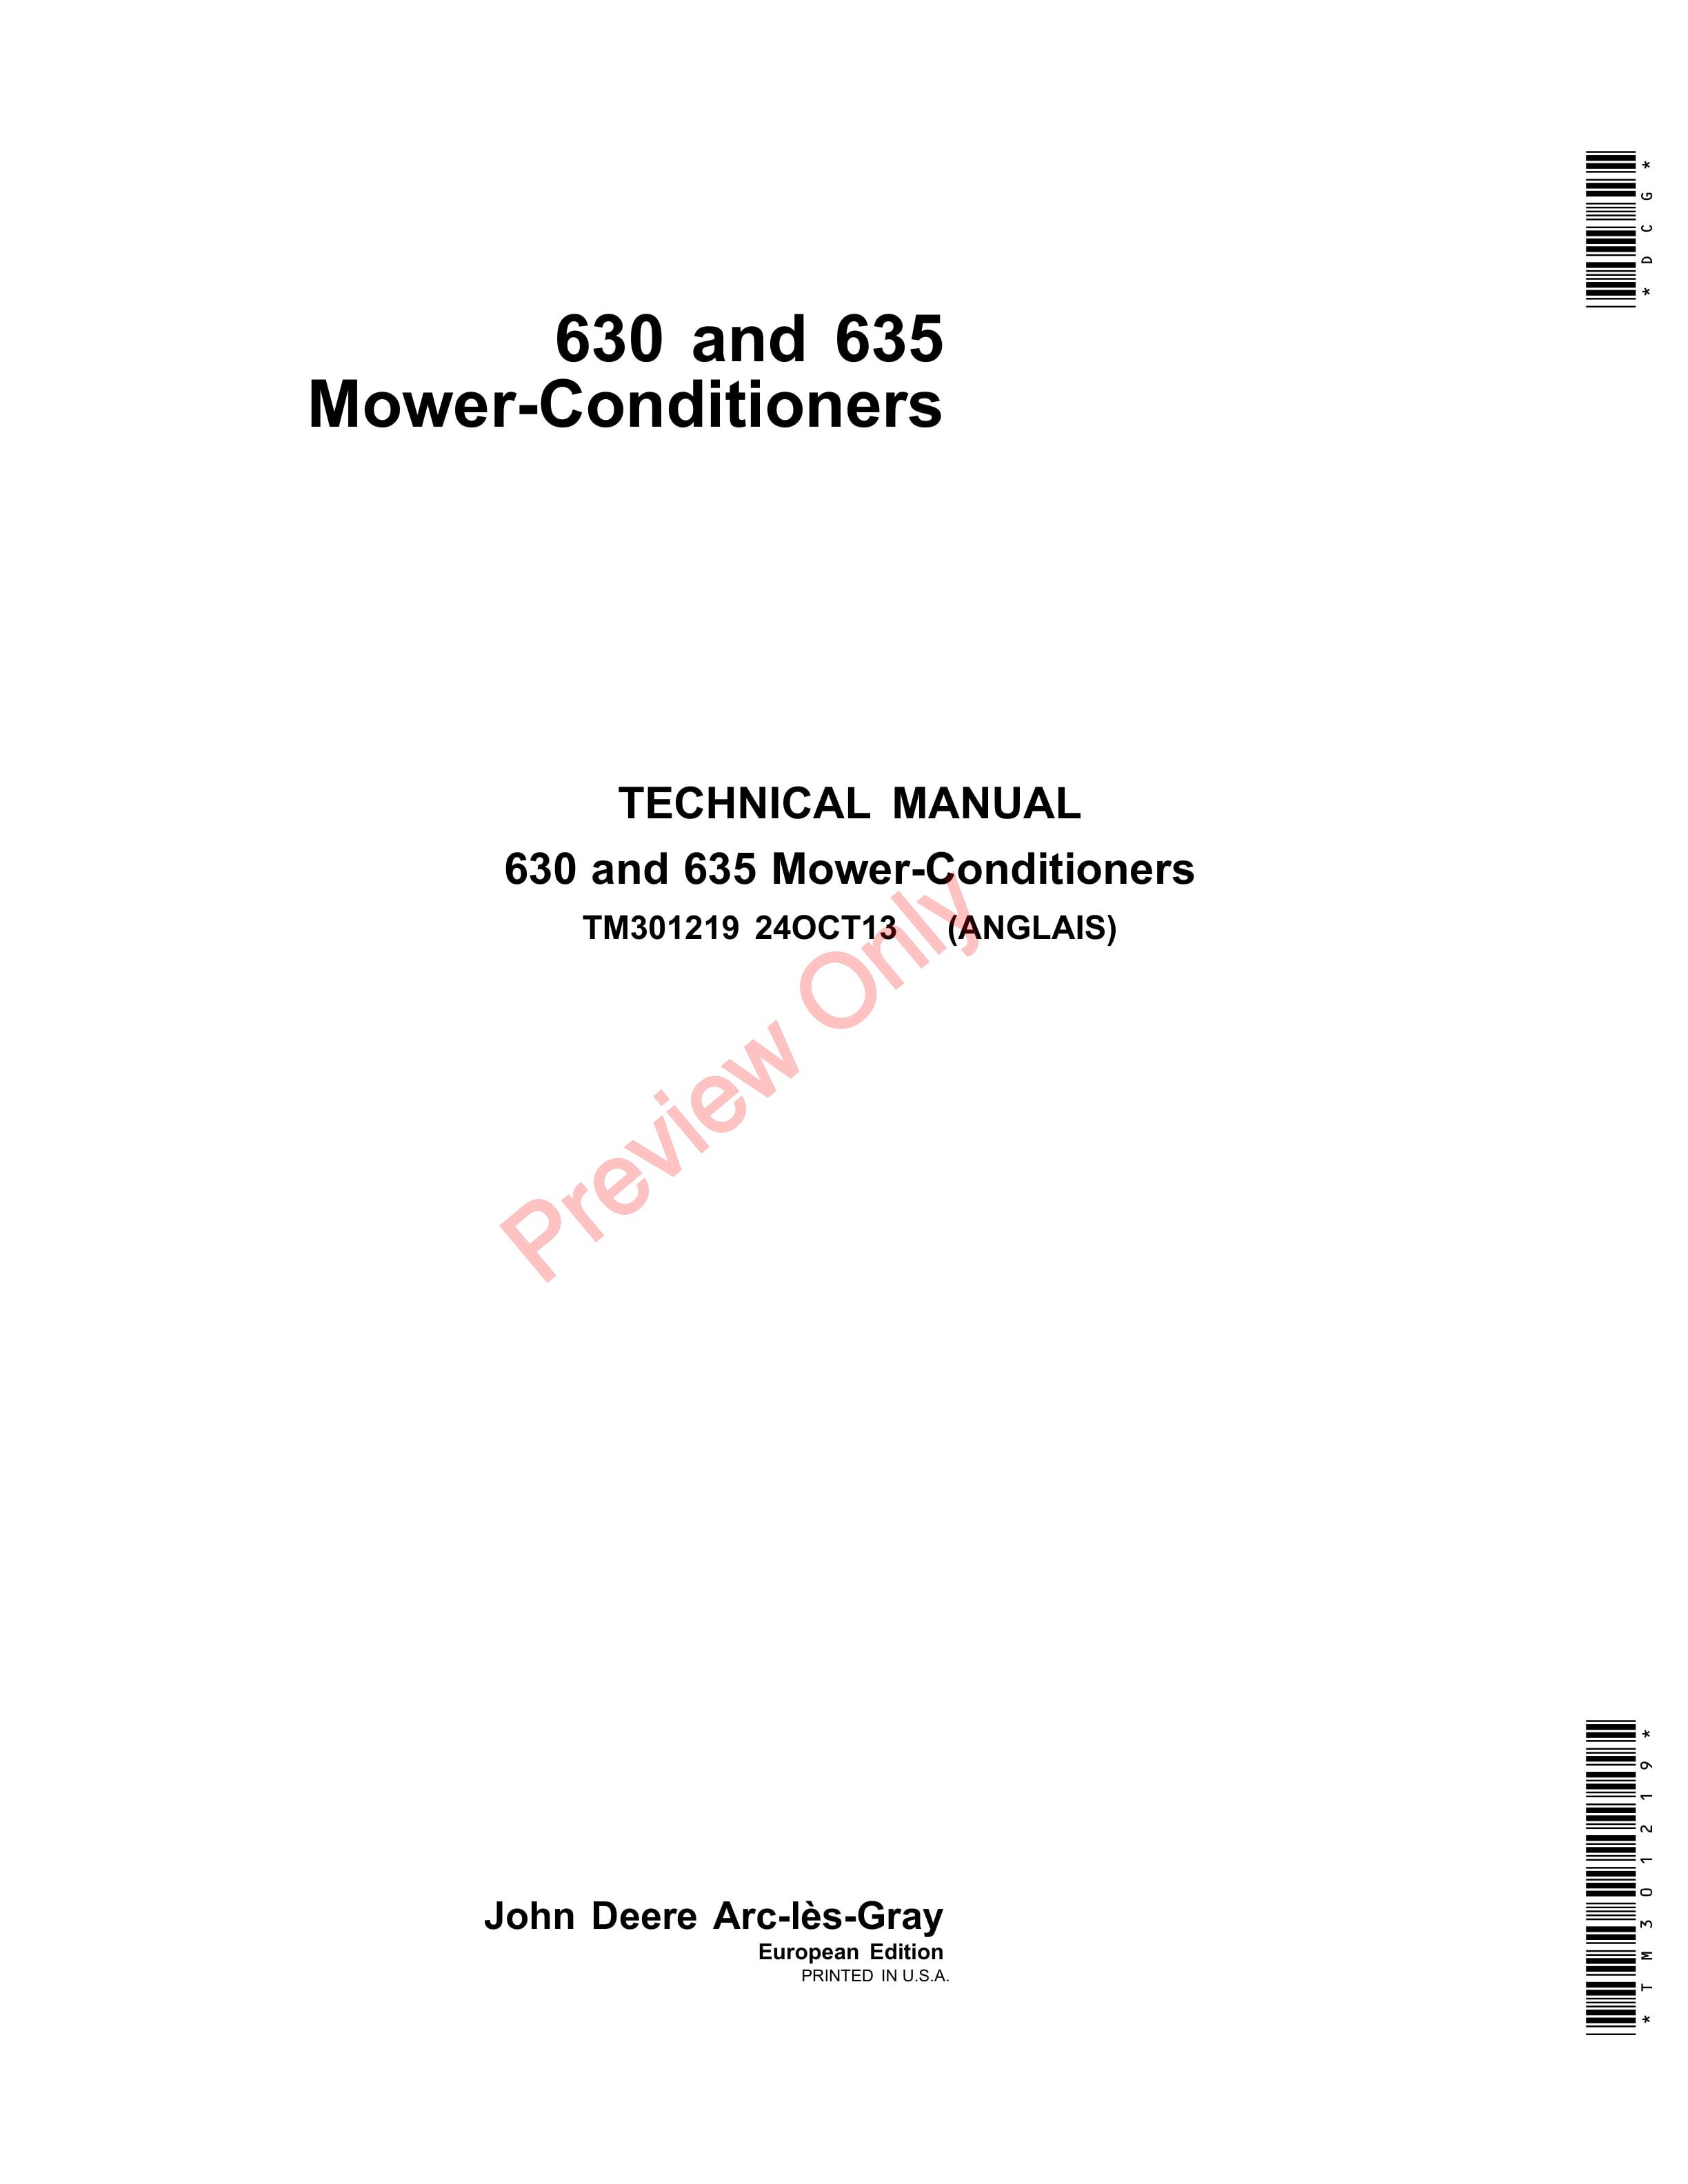 John Deere 630 and 635 Mower Conditioners Technical Manual TM301219 24OCT13 1